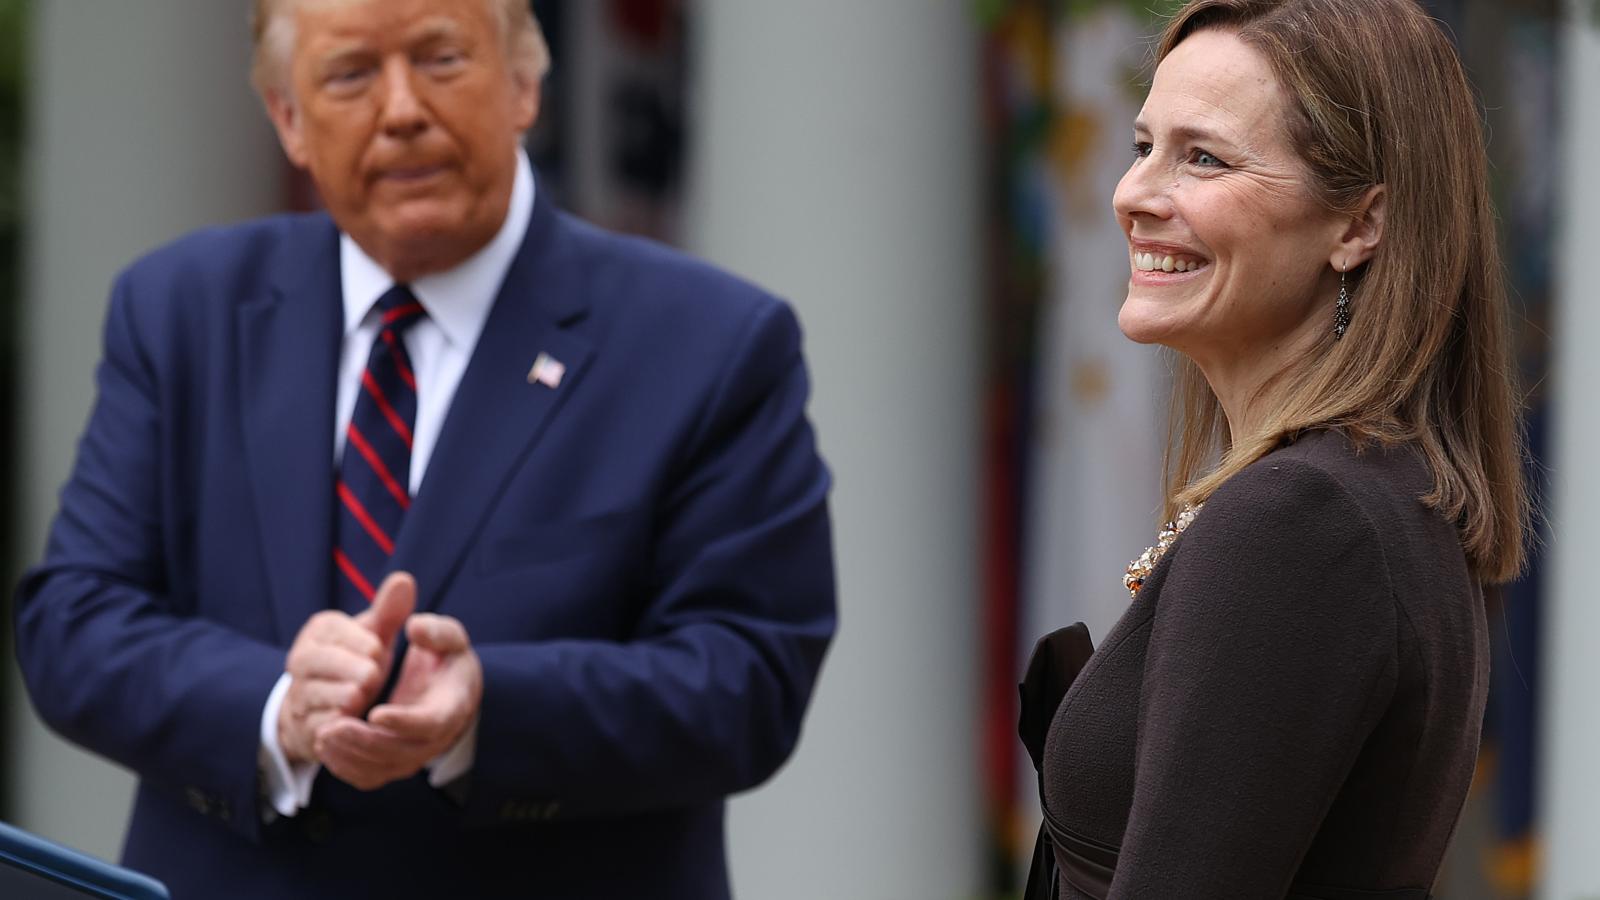 President Donald Trump introduces 7th U.S. Circuit Court Judge Amy Coney Barrett as his nominee to the Supreme Court in the Rose Garden at the White House.